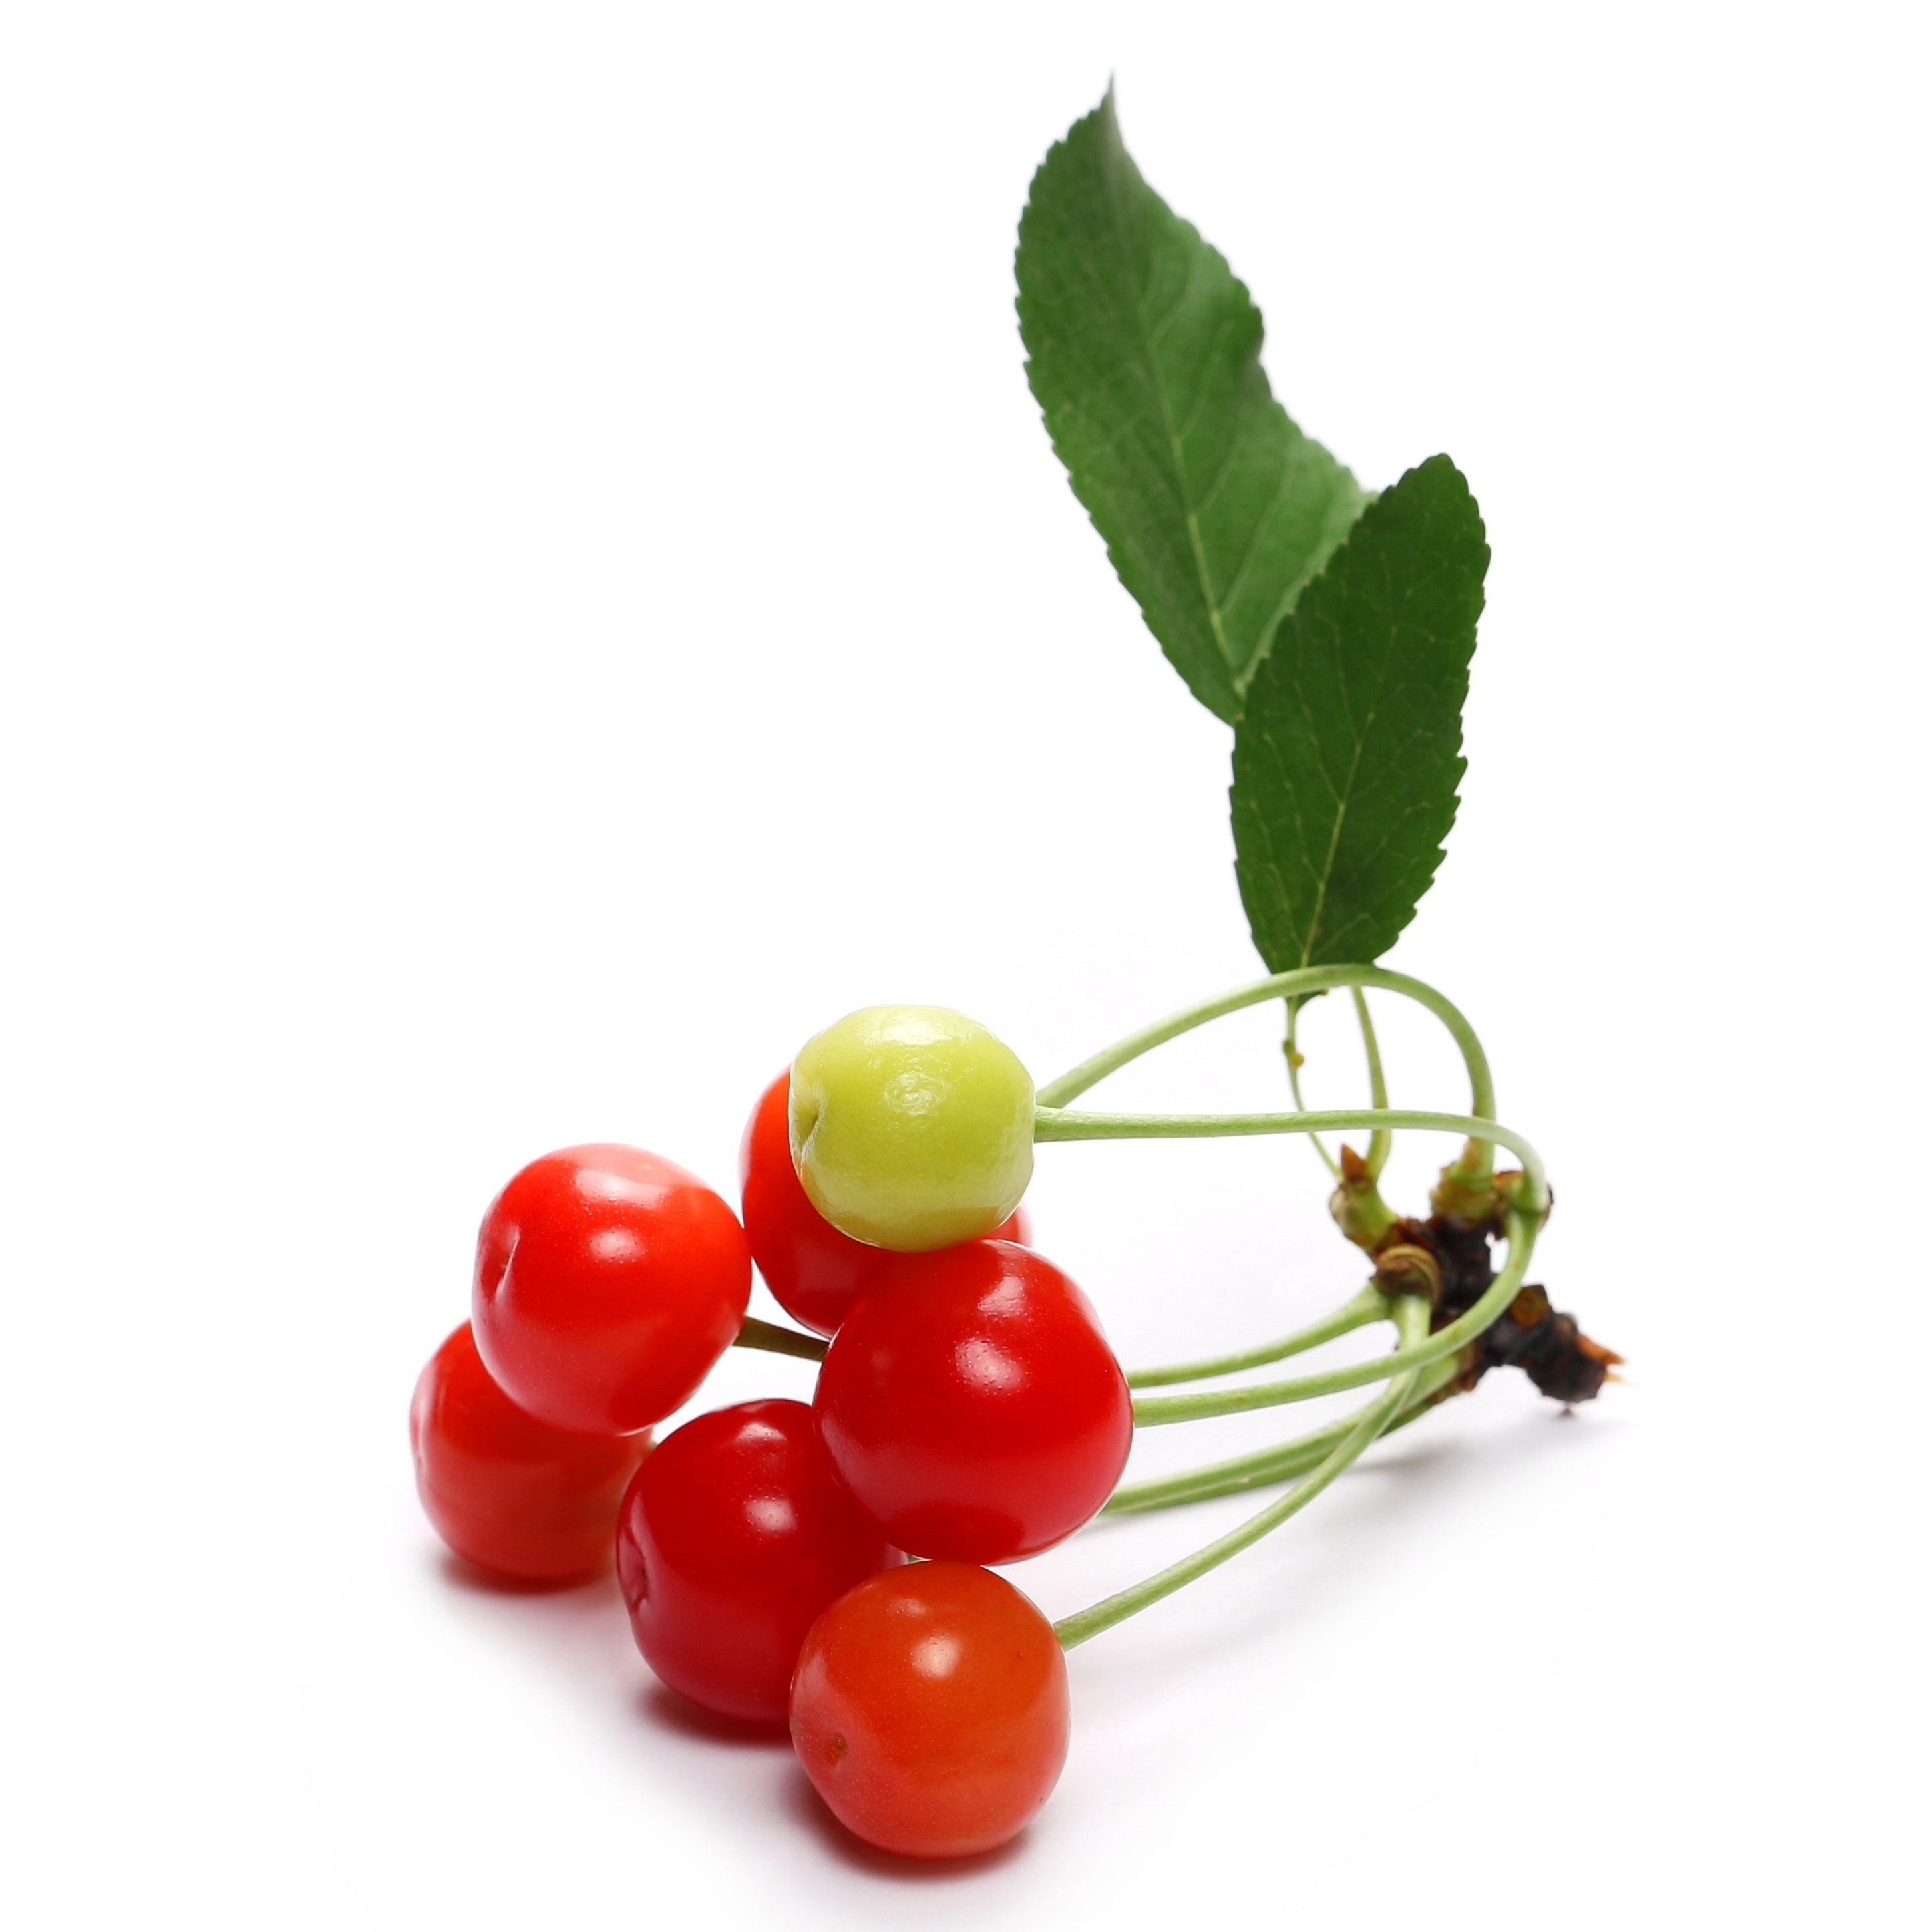 Tart Cherries on stem with leaves on white background